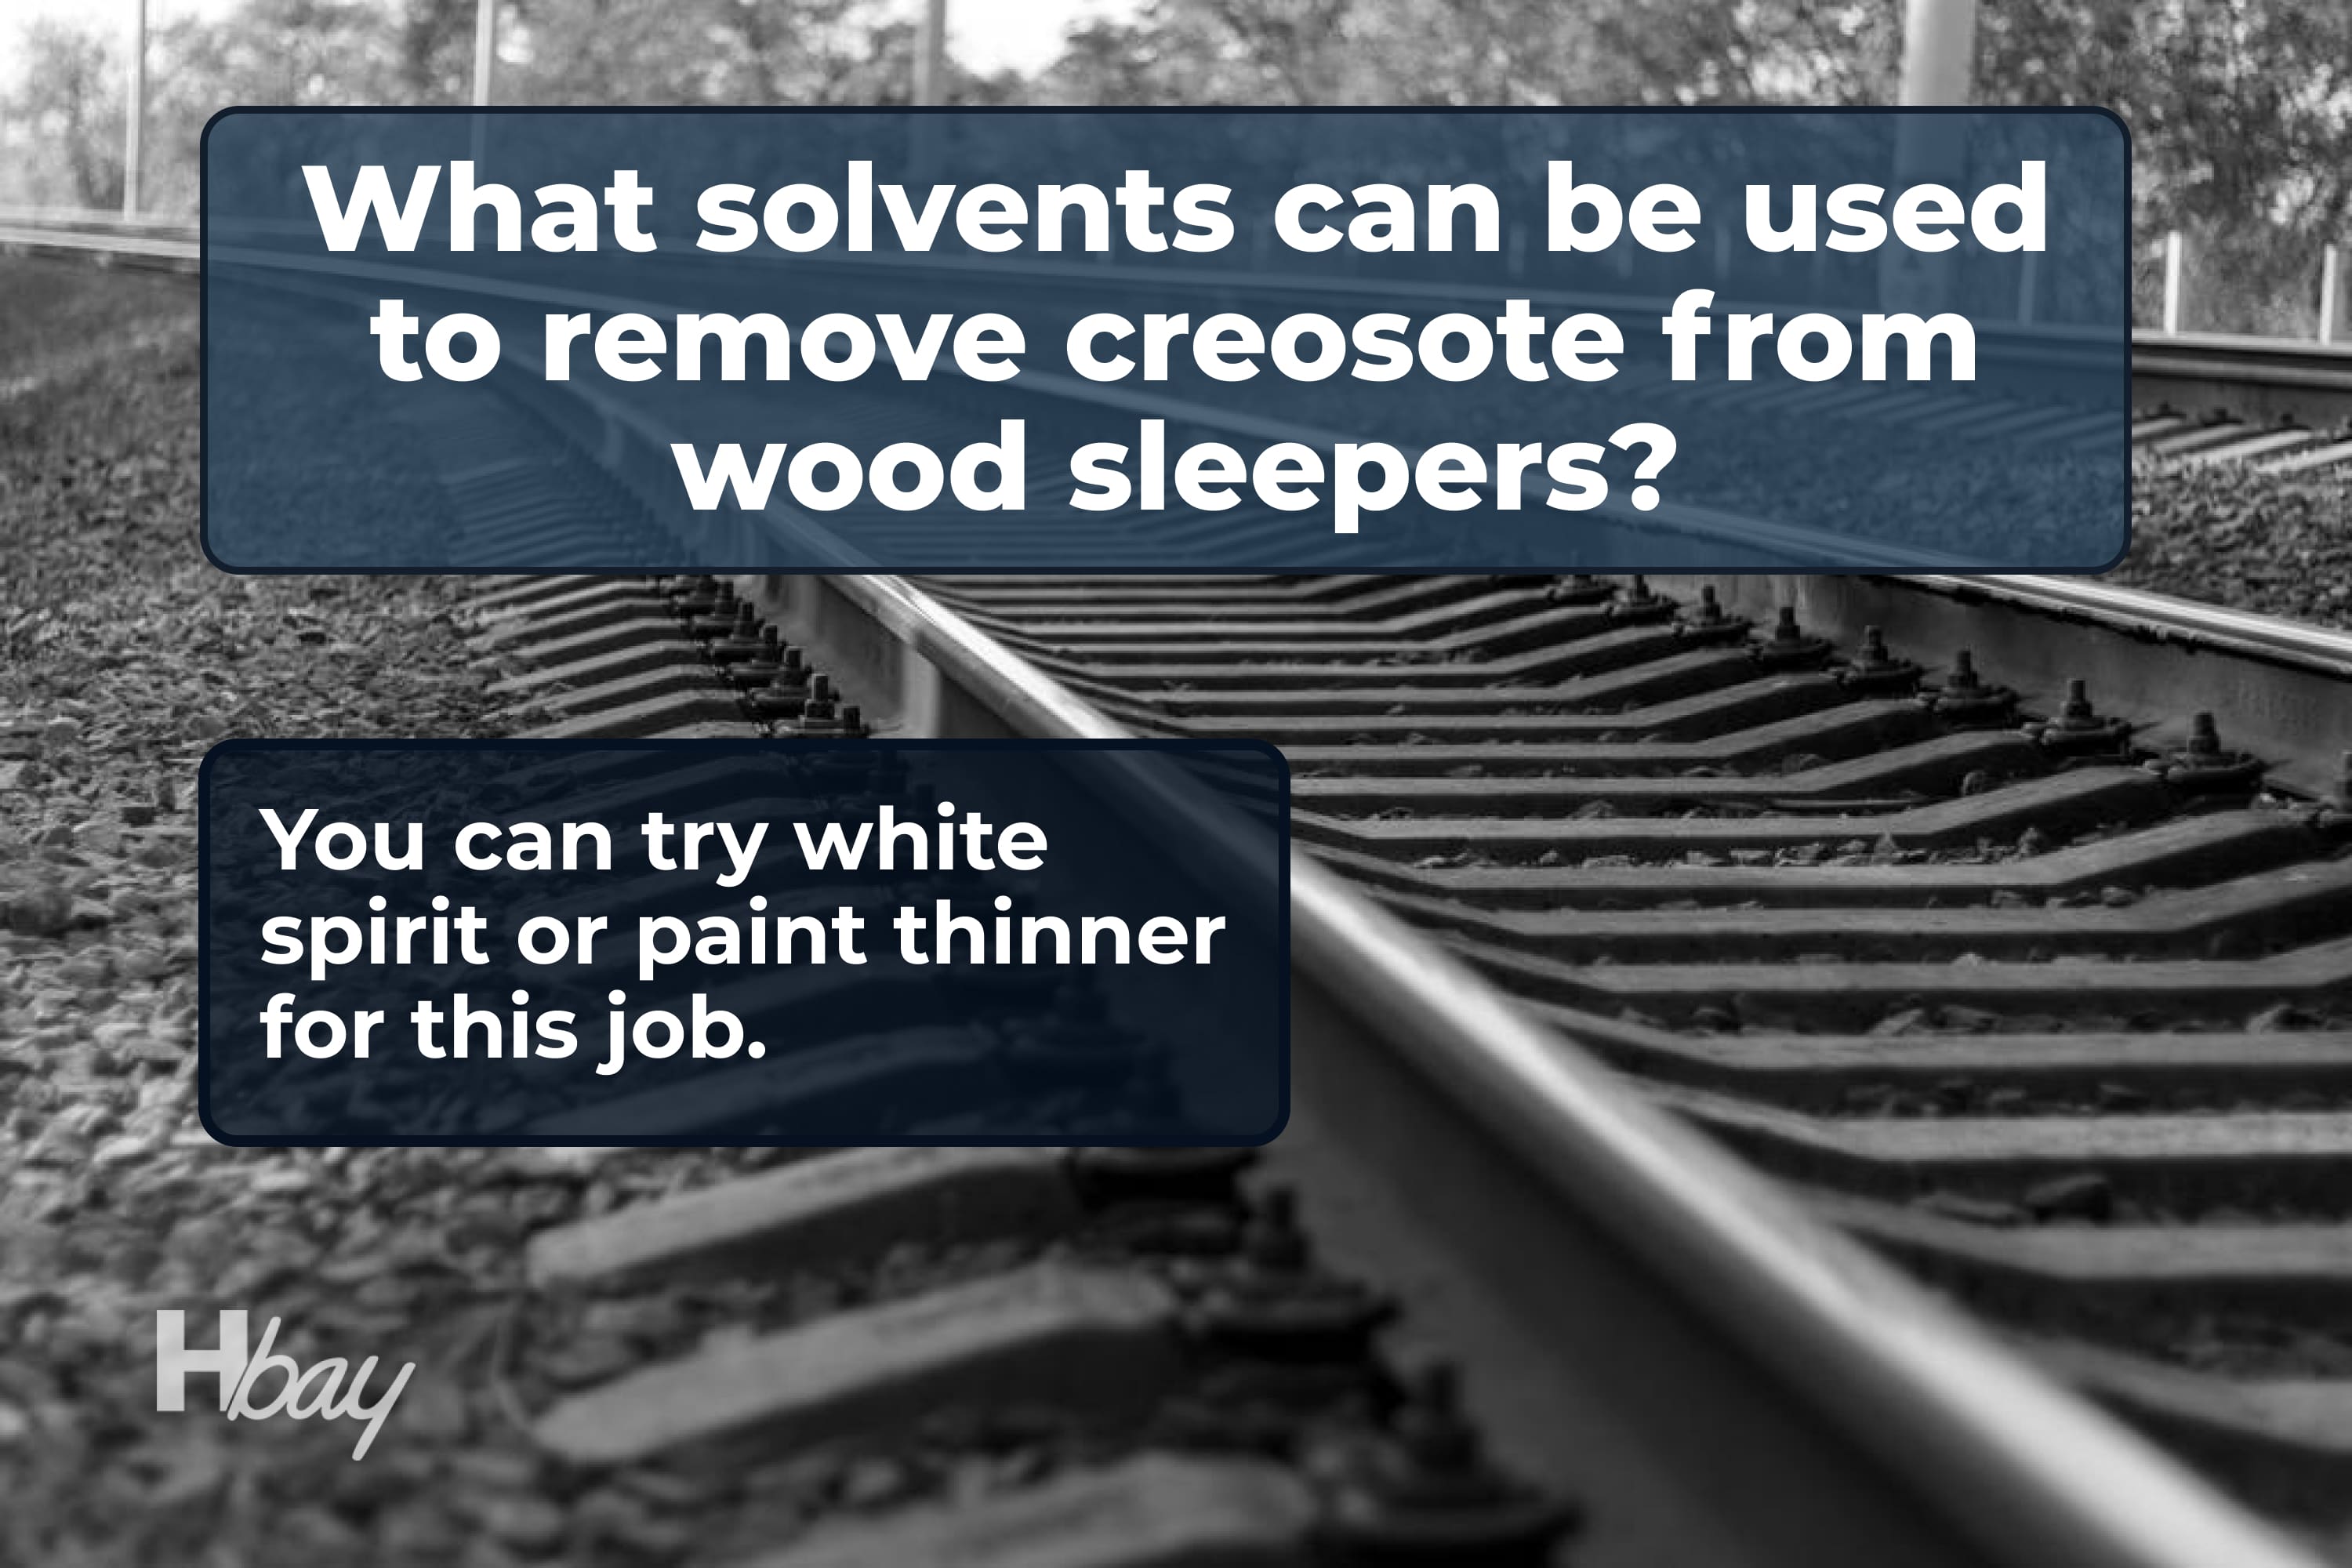 What solvents can be used to remove creosote from wood sleepers